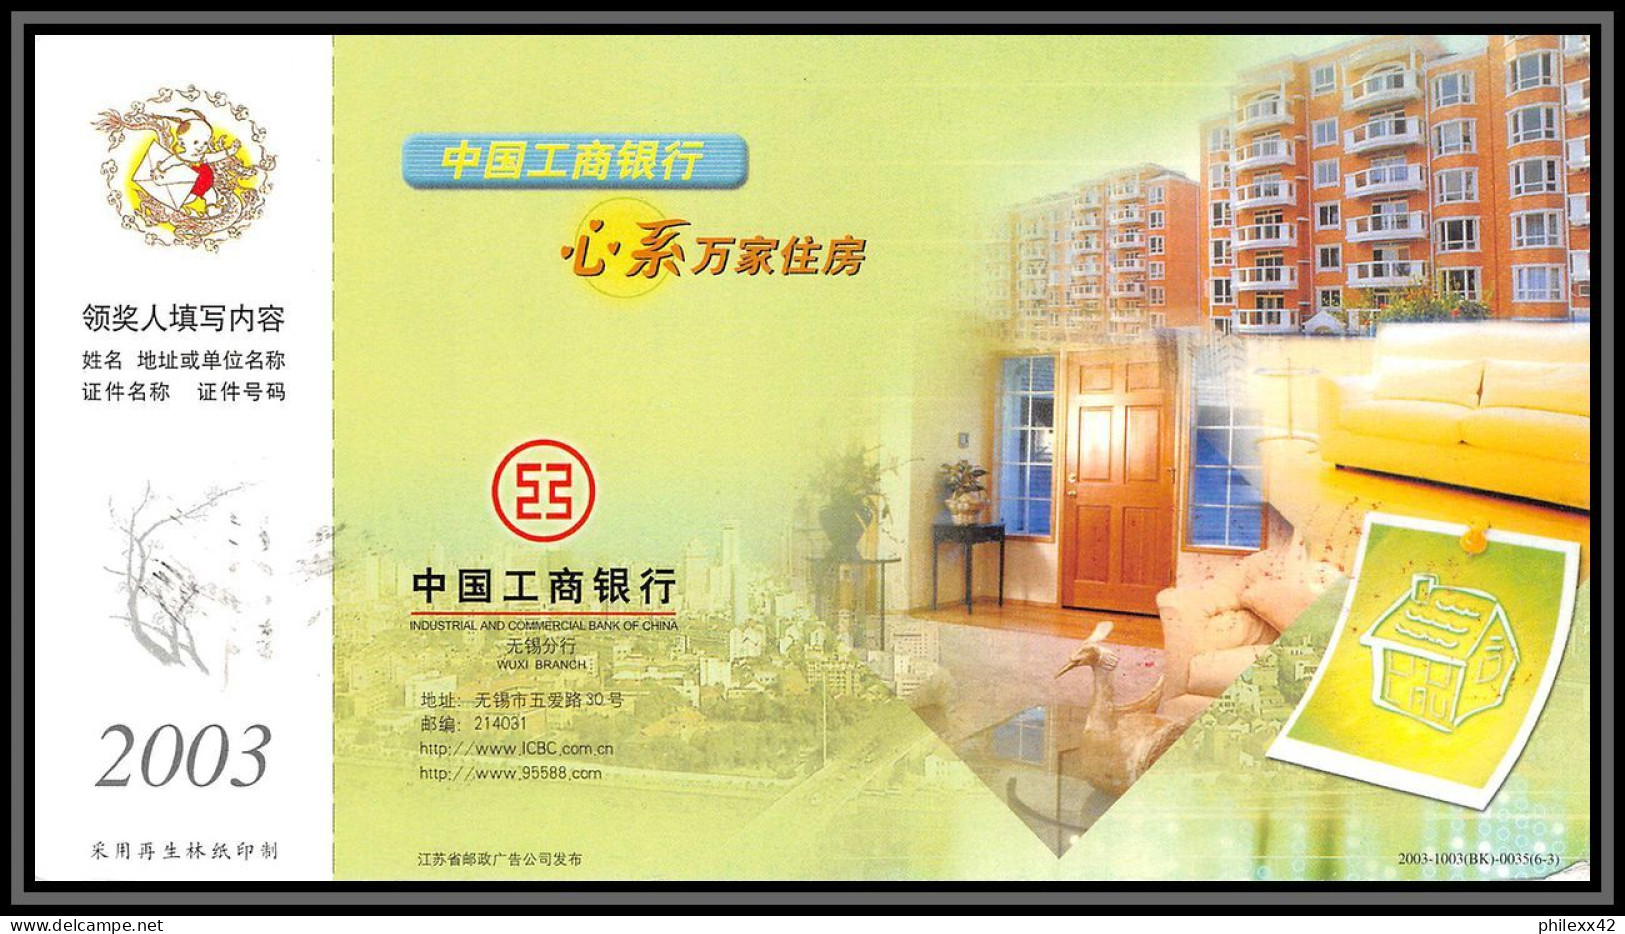 2442 Espace (space Raumfahrt) Entier Postal (Stamped Stationery) Chine (china) 20/5/2015 - Asien